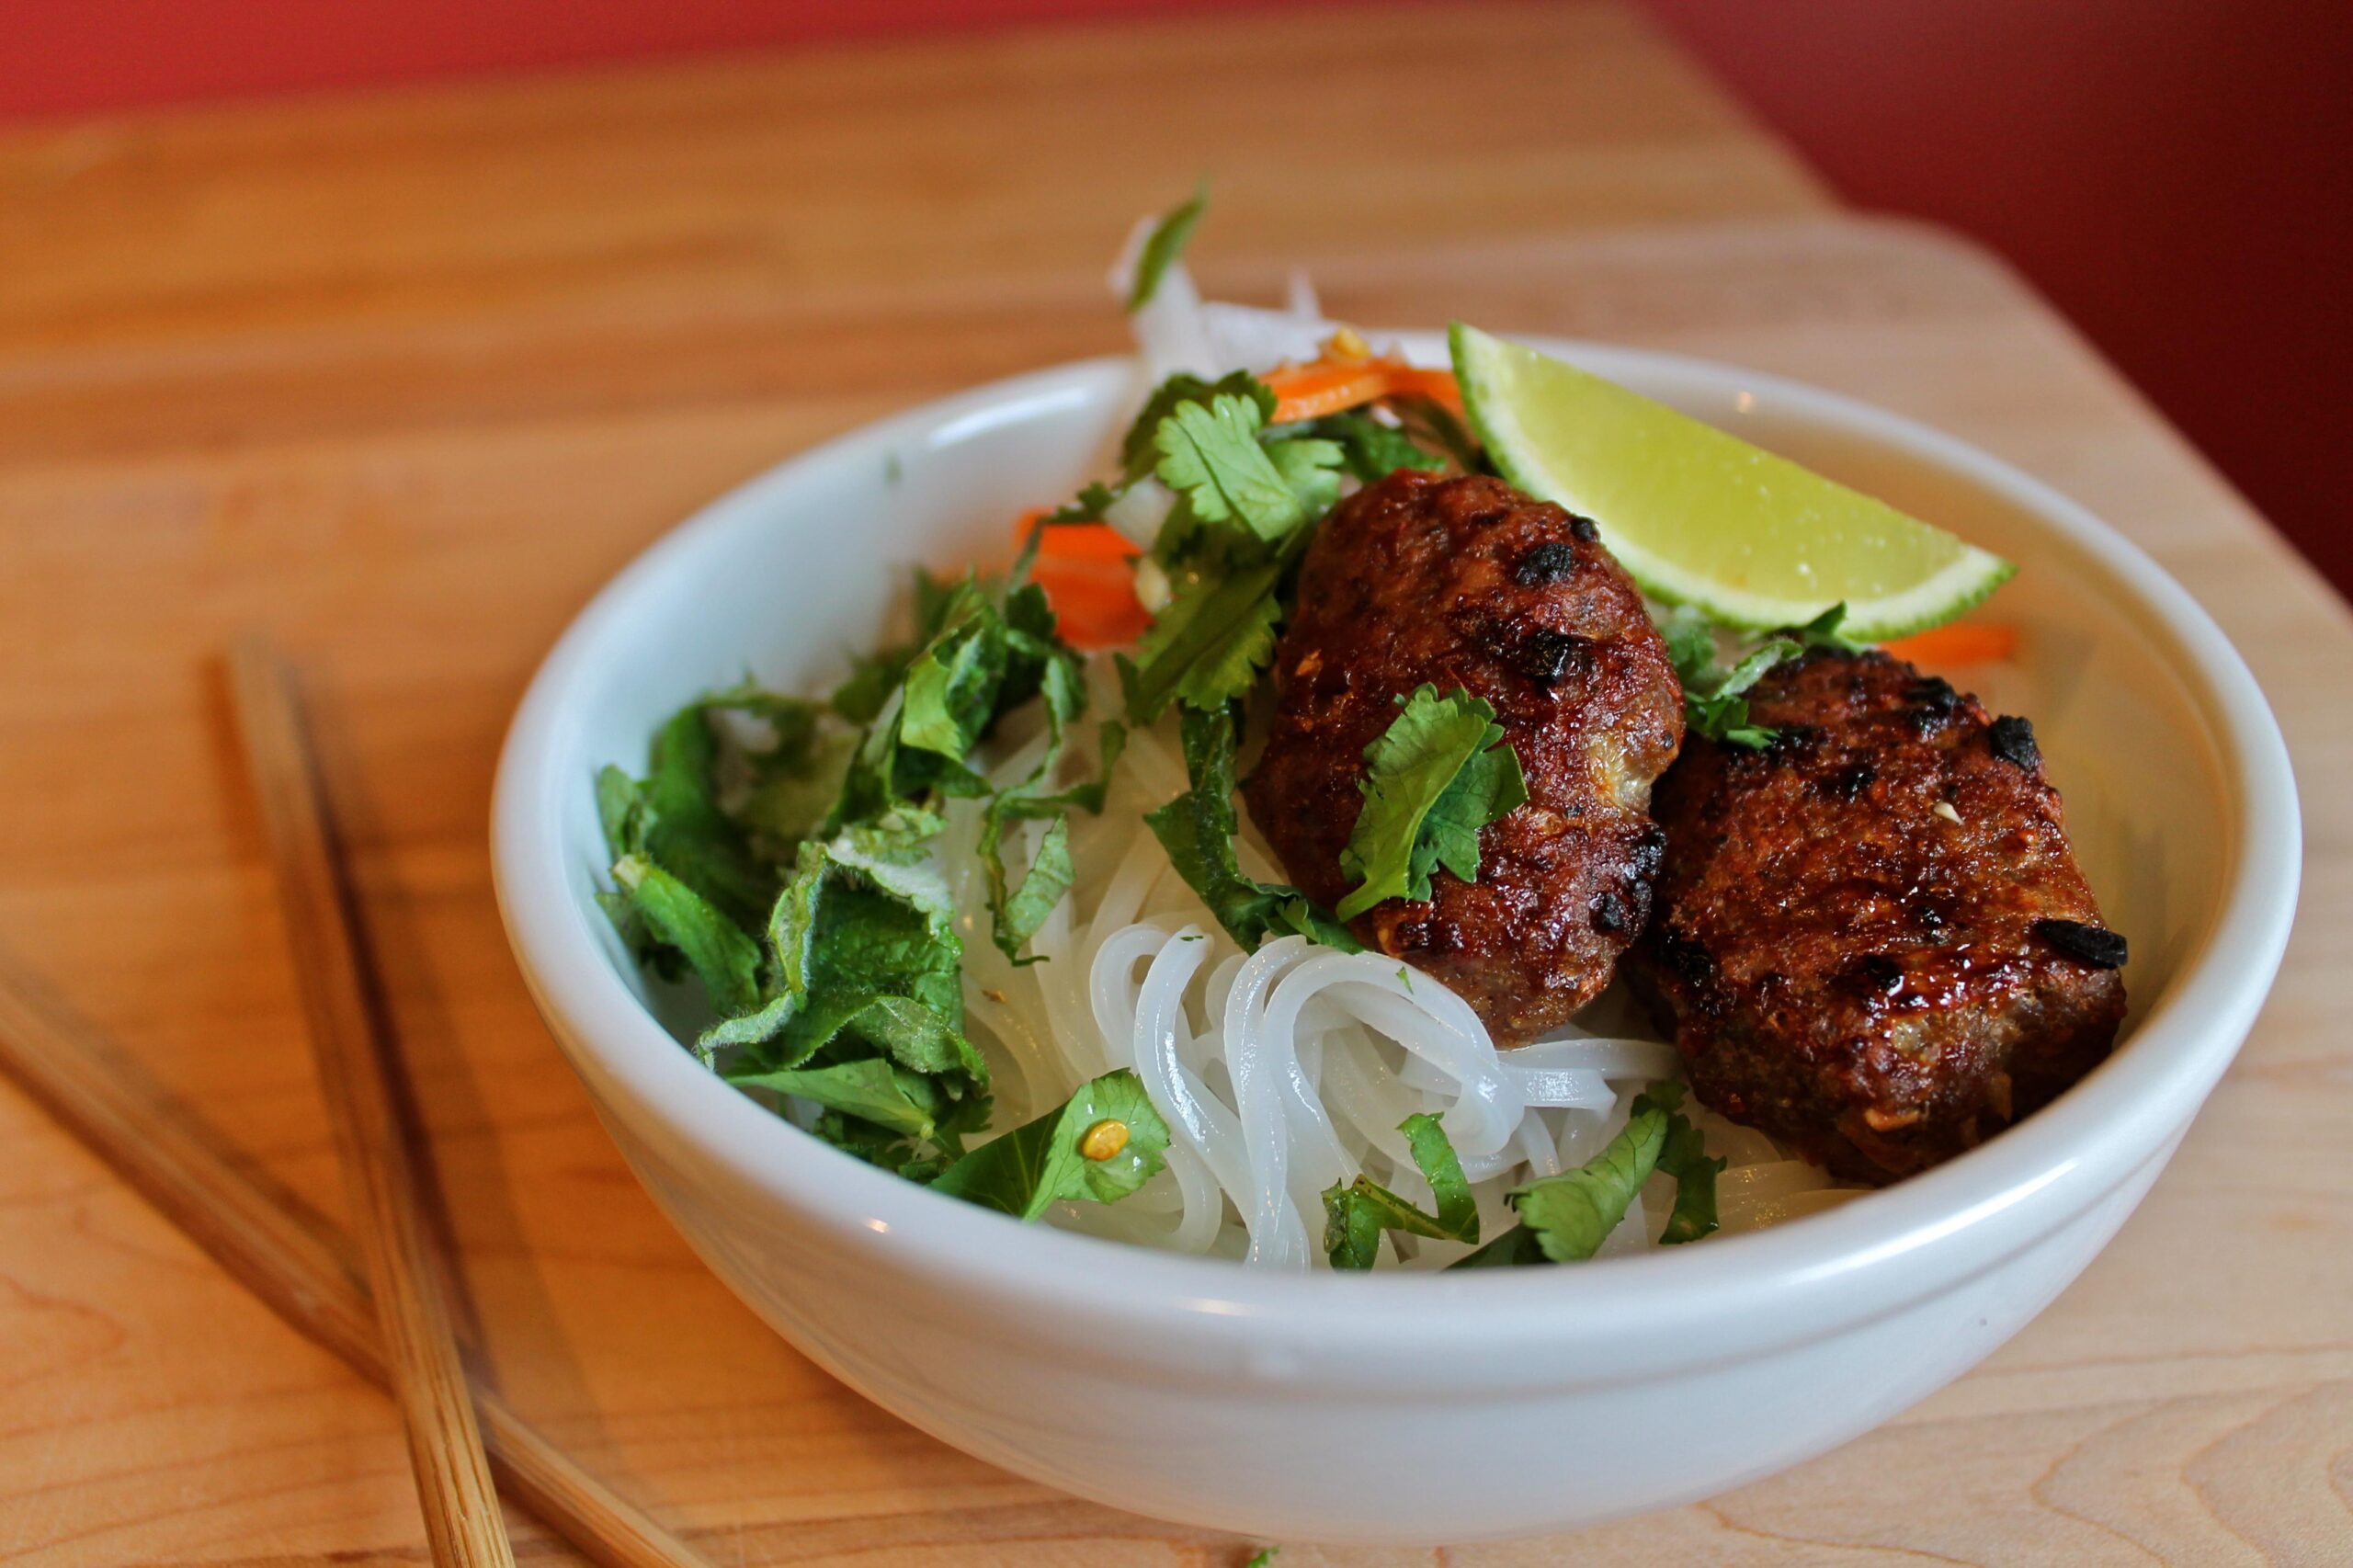  Get ready to be transported to the streets of Vietnam with these delicious meatballs.